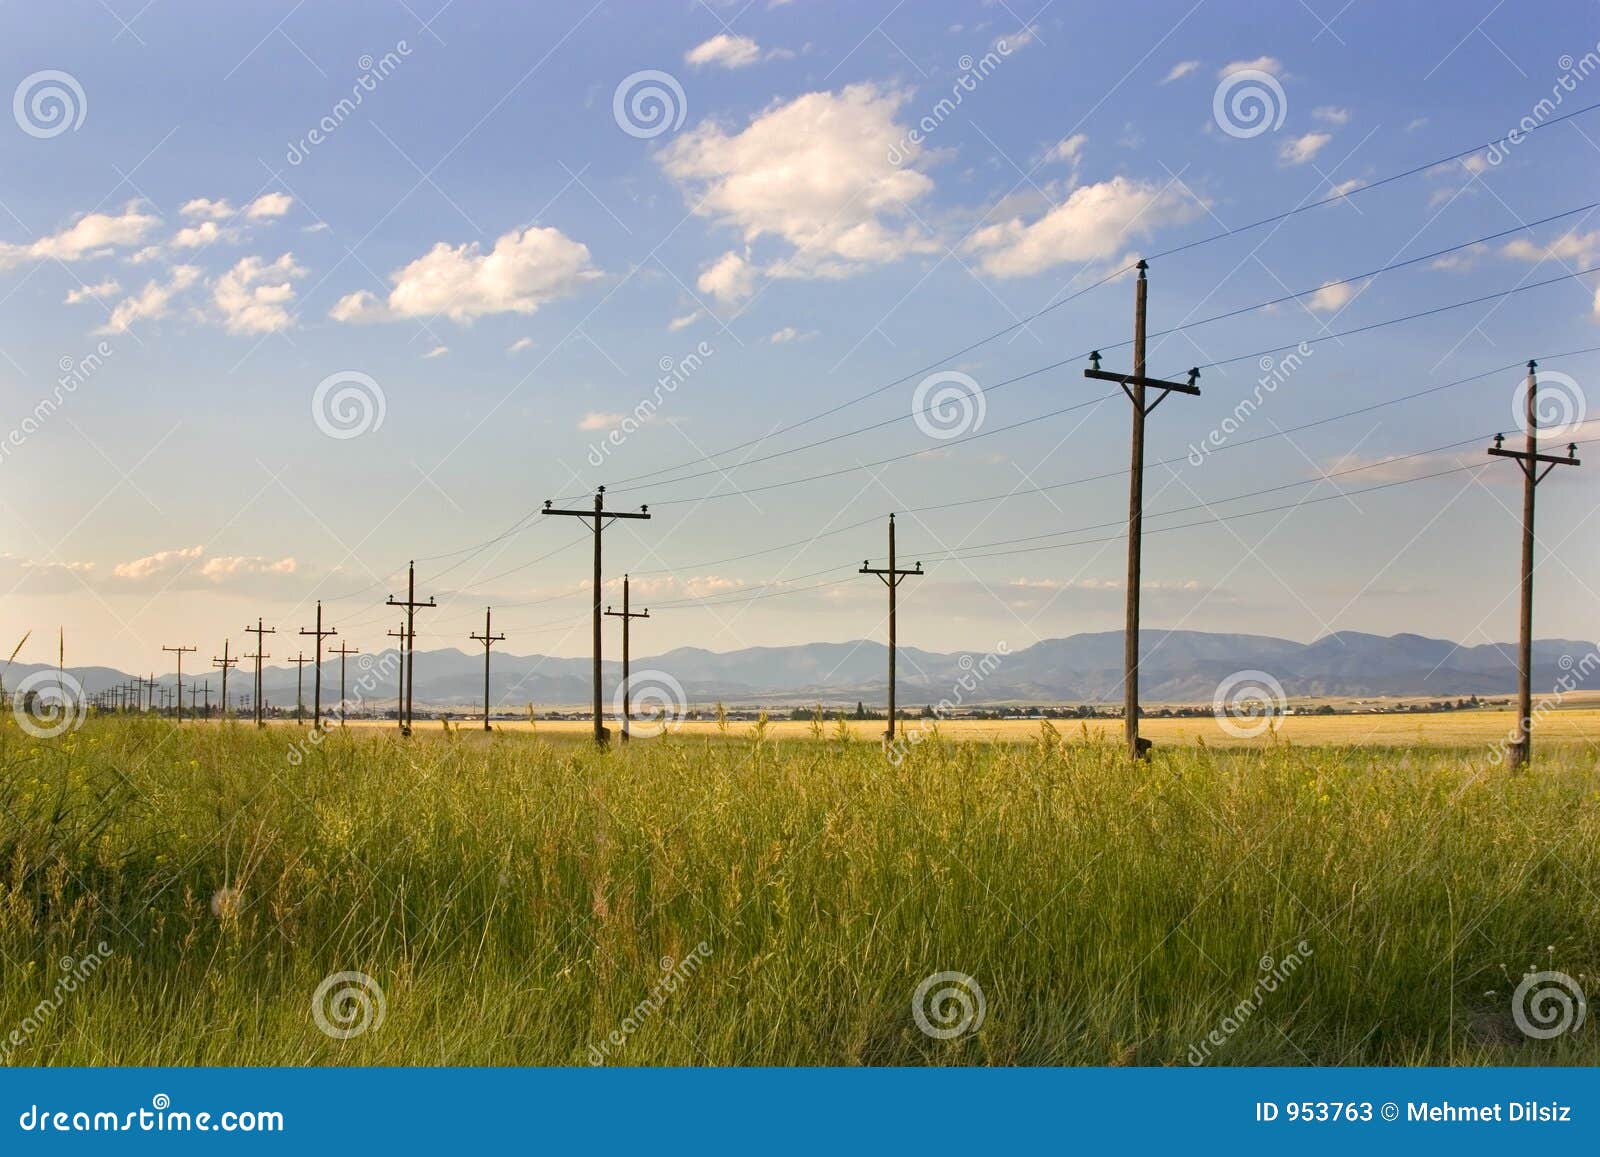 electric posts in a field - helena